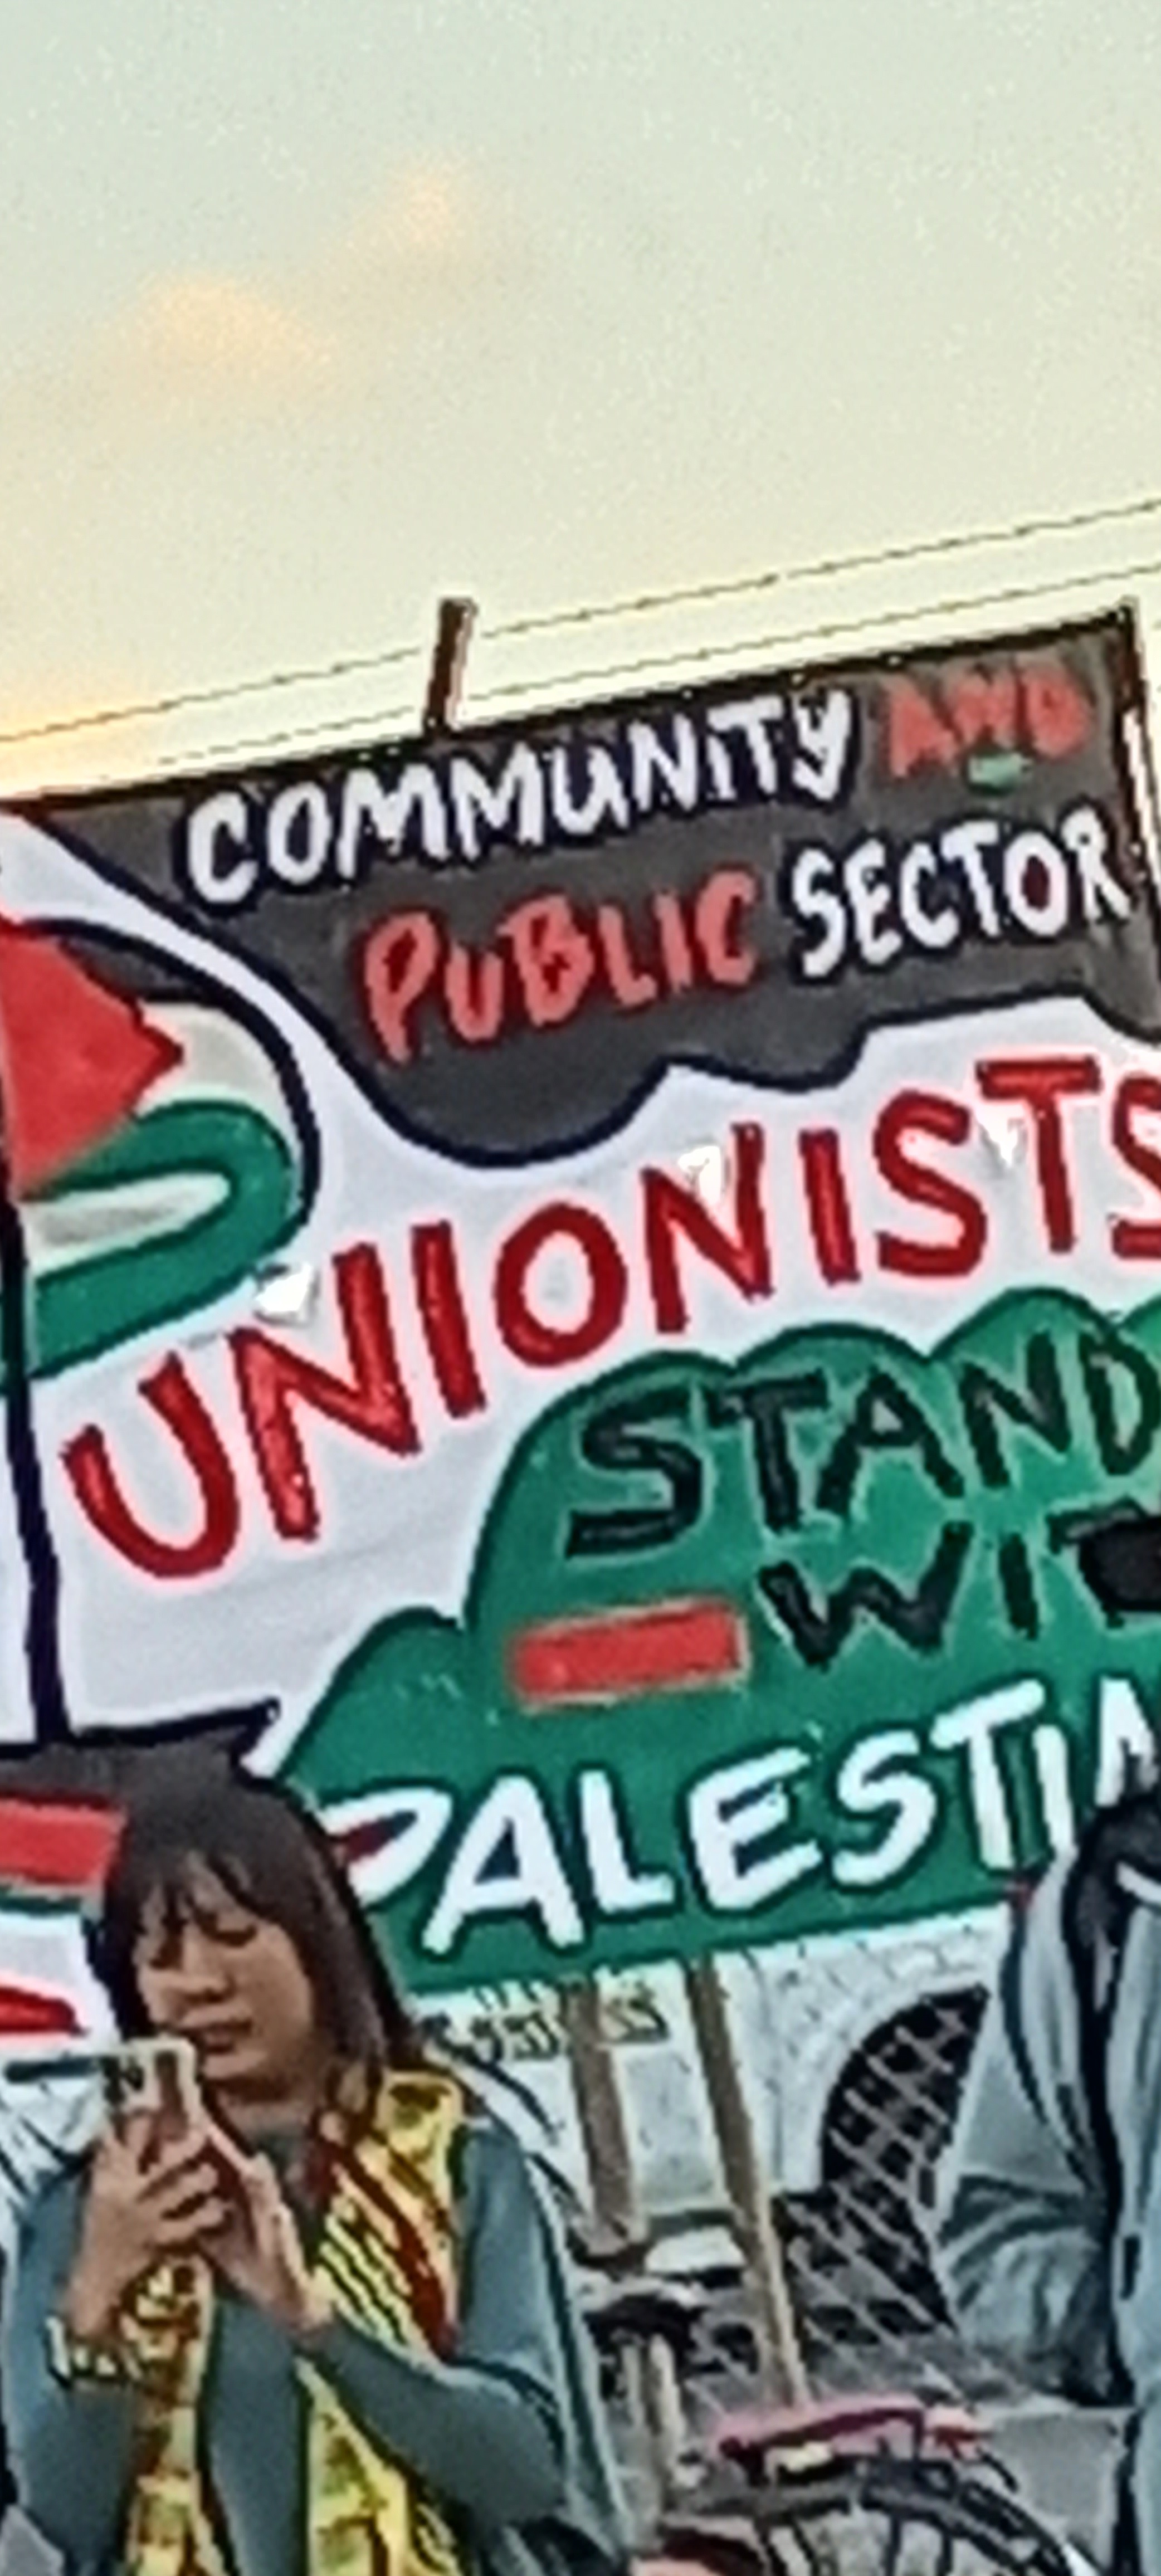 Unions for Palestine